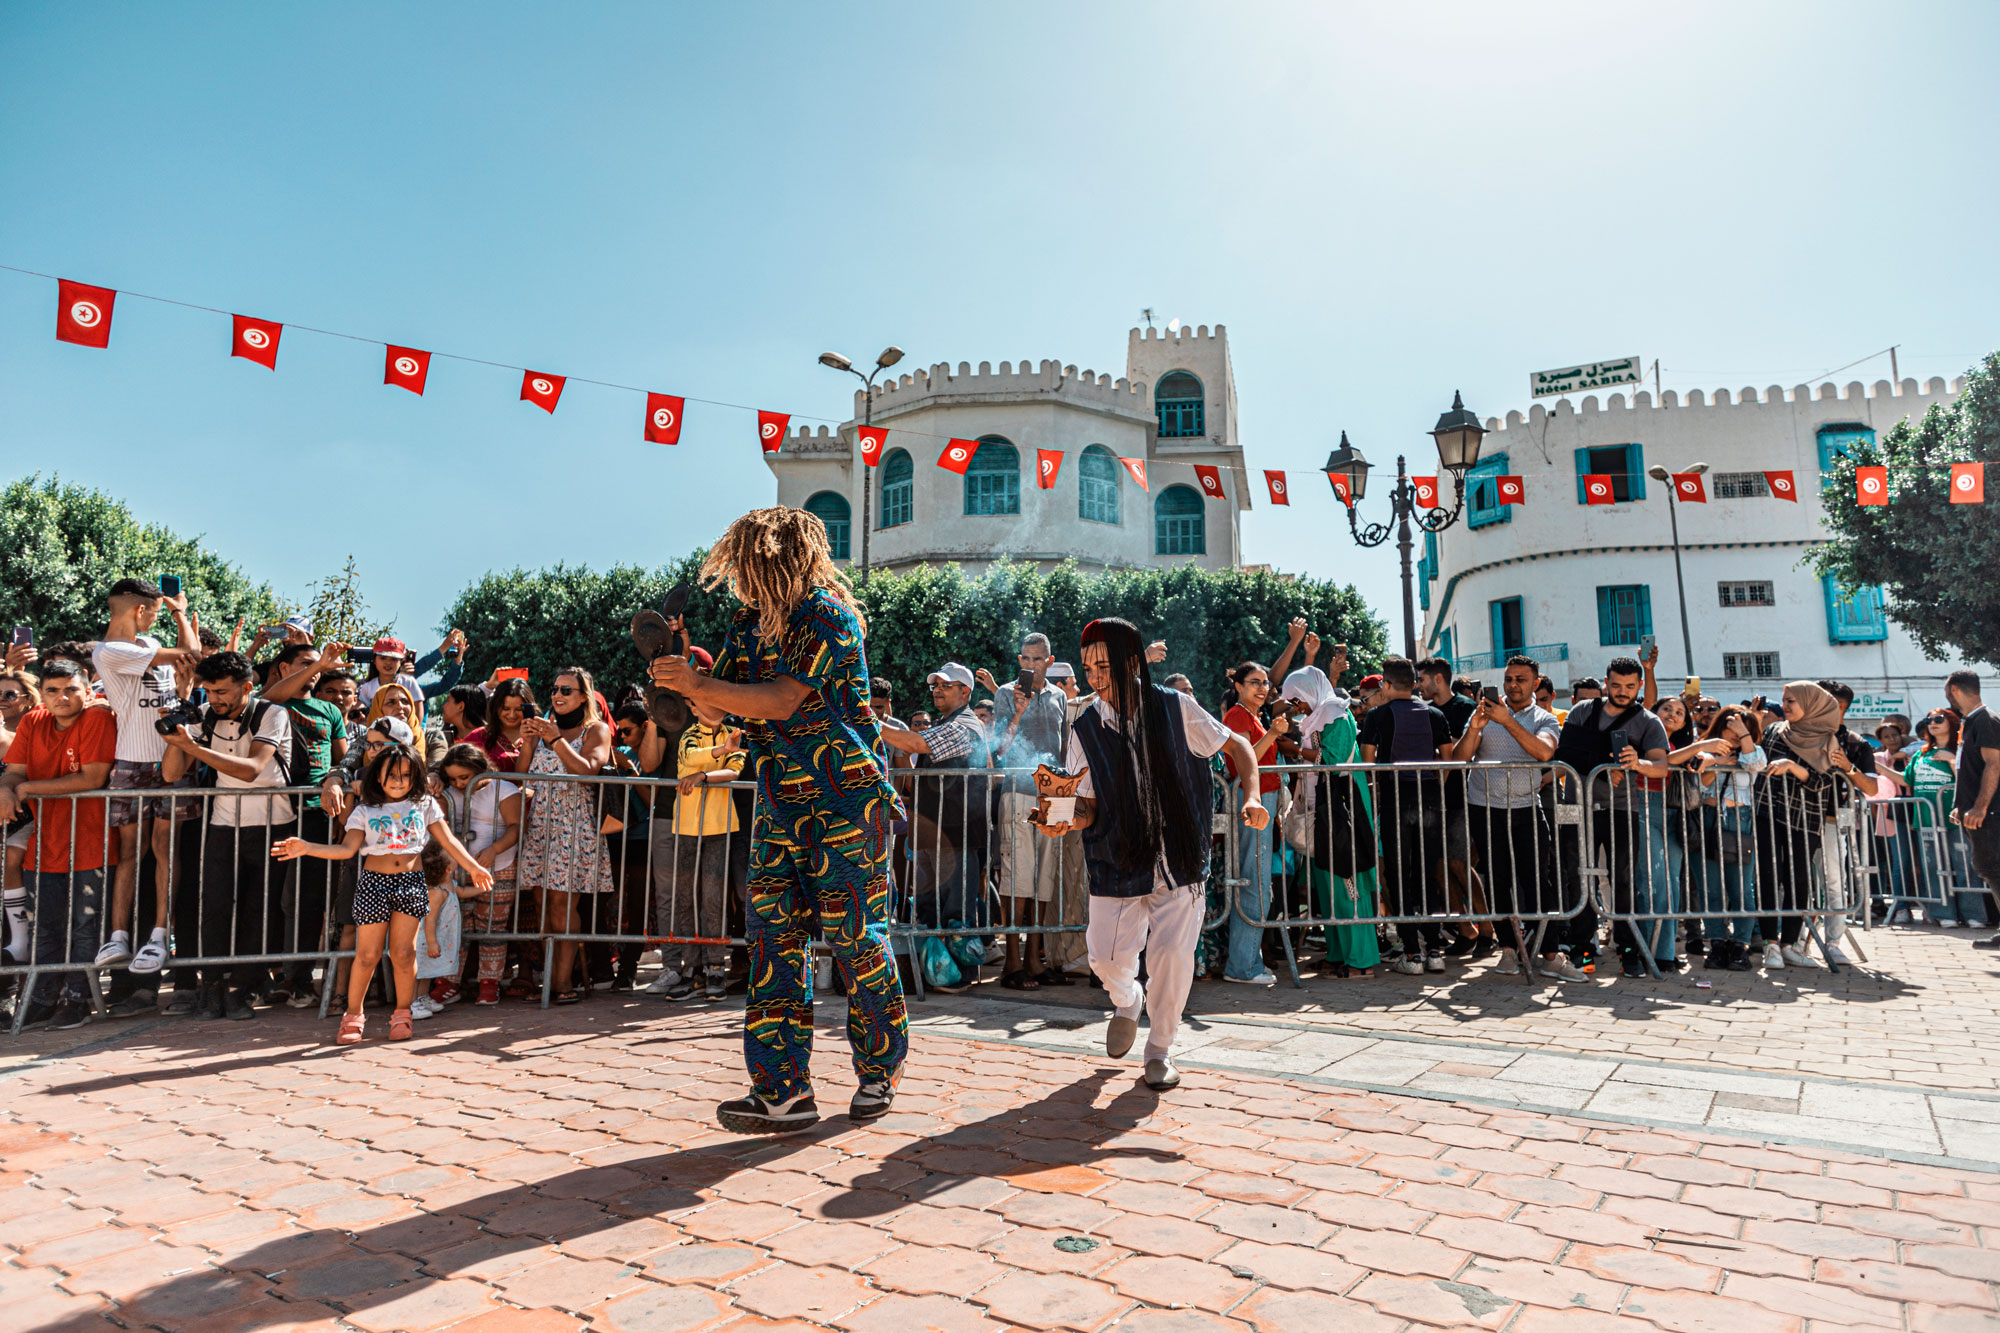 In the mid-day sun, two performers dance in a cobble-stoned town square. Above them hang small Tunisian flags and behind them people of all ages clap and watch, smiling.